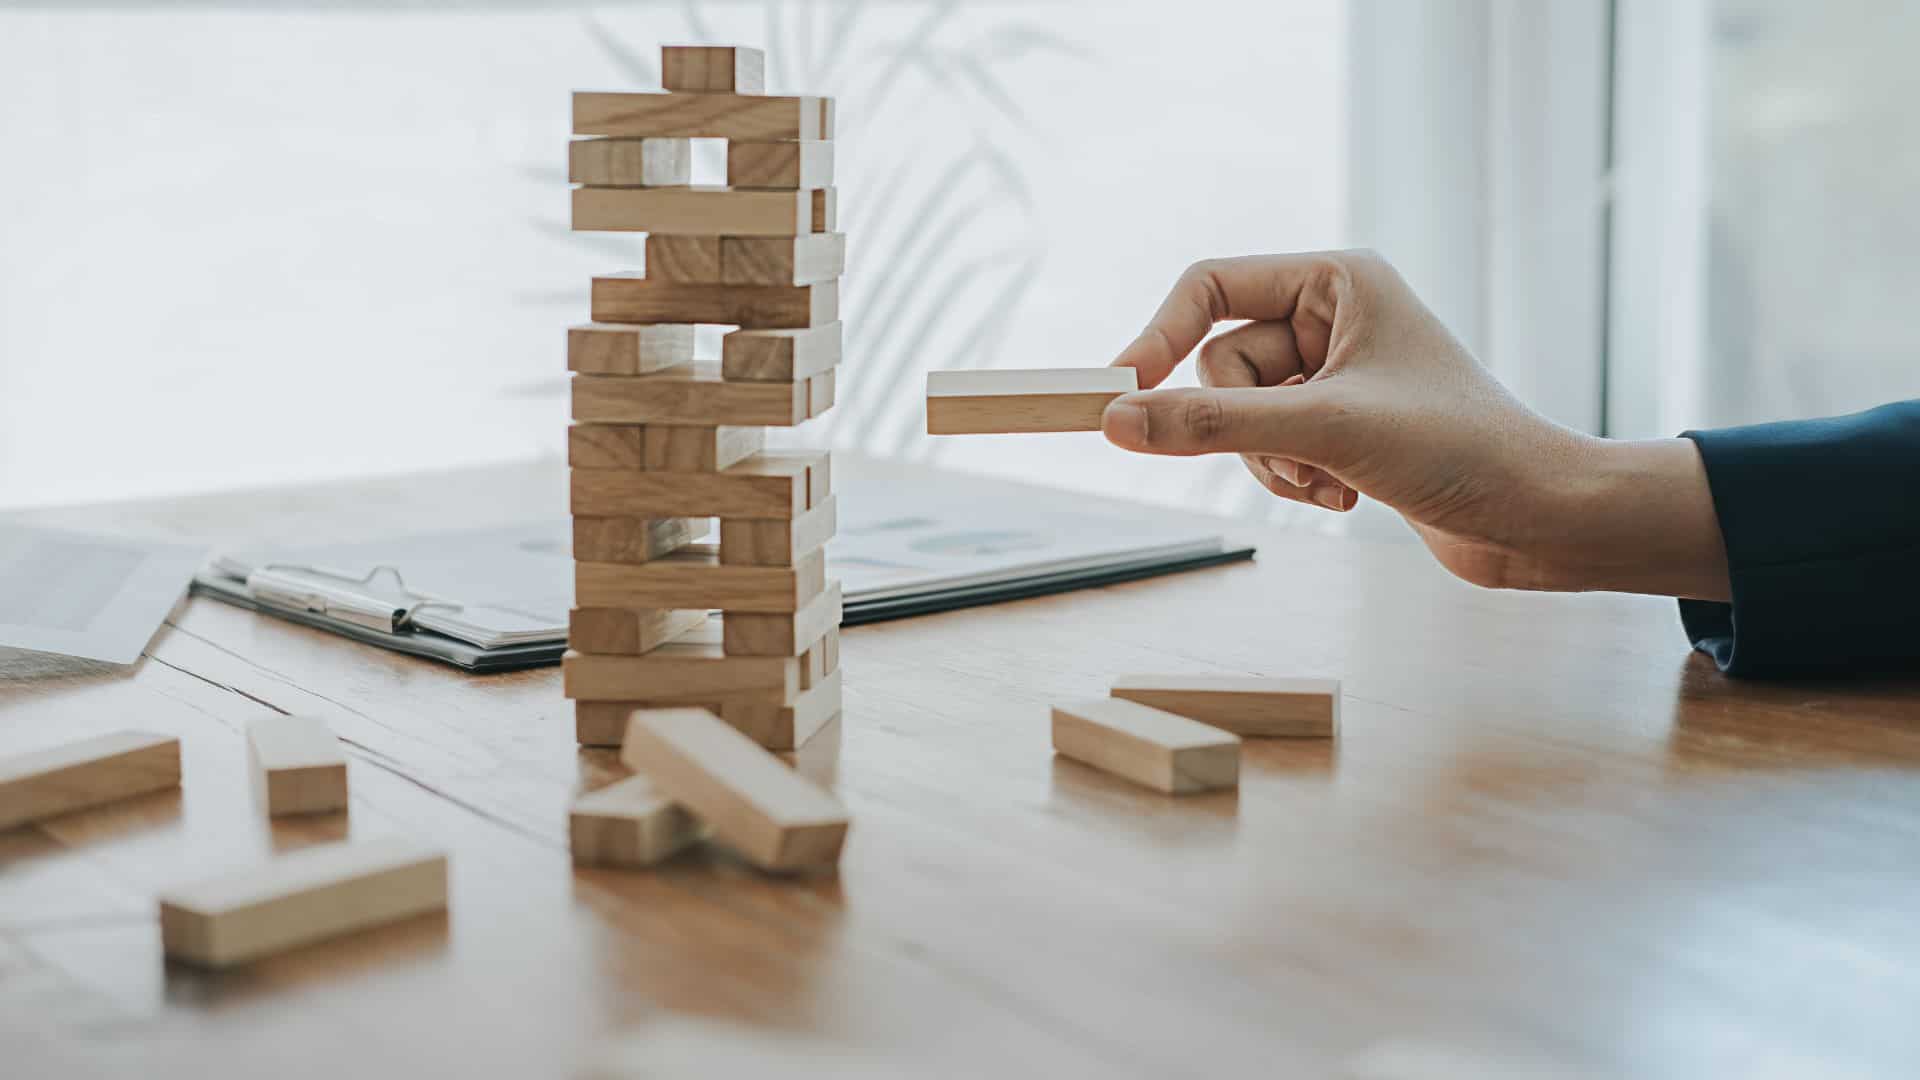 A businessman is building a tower of wooden blocks on a table.